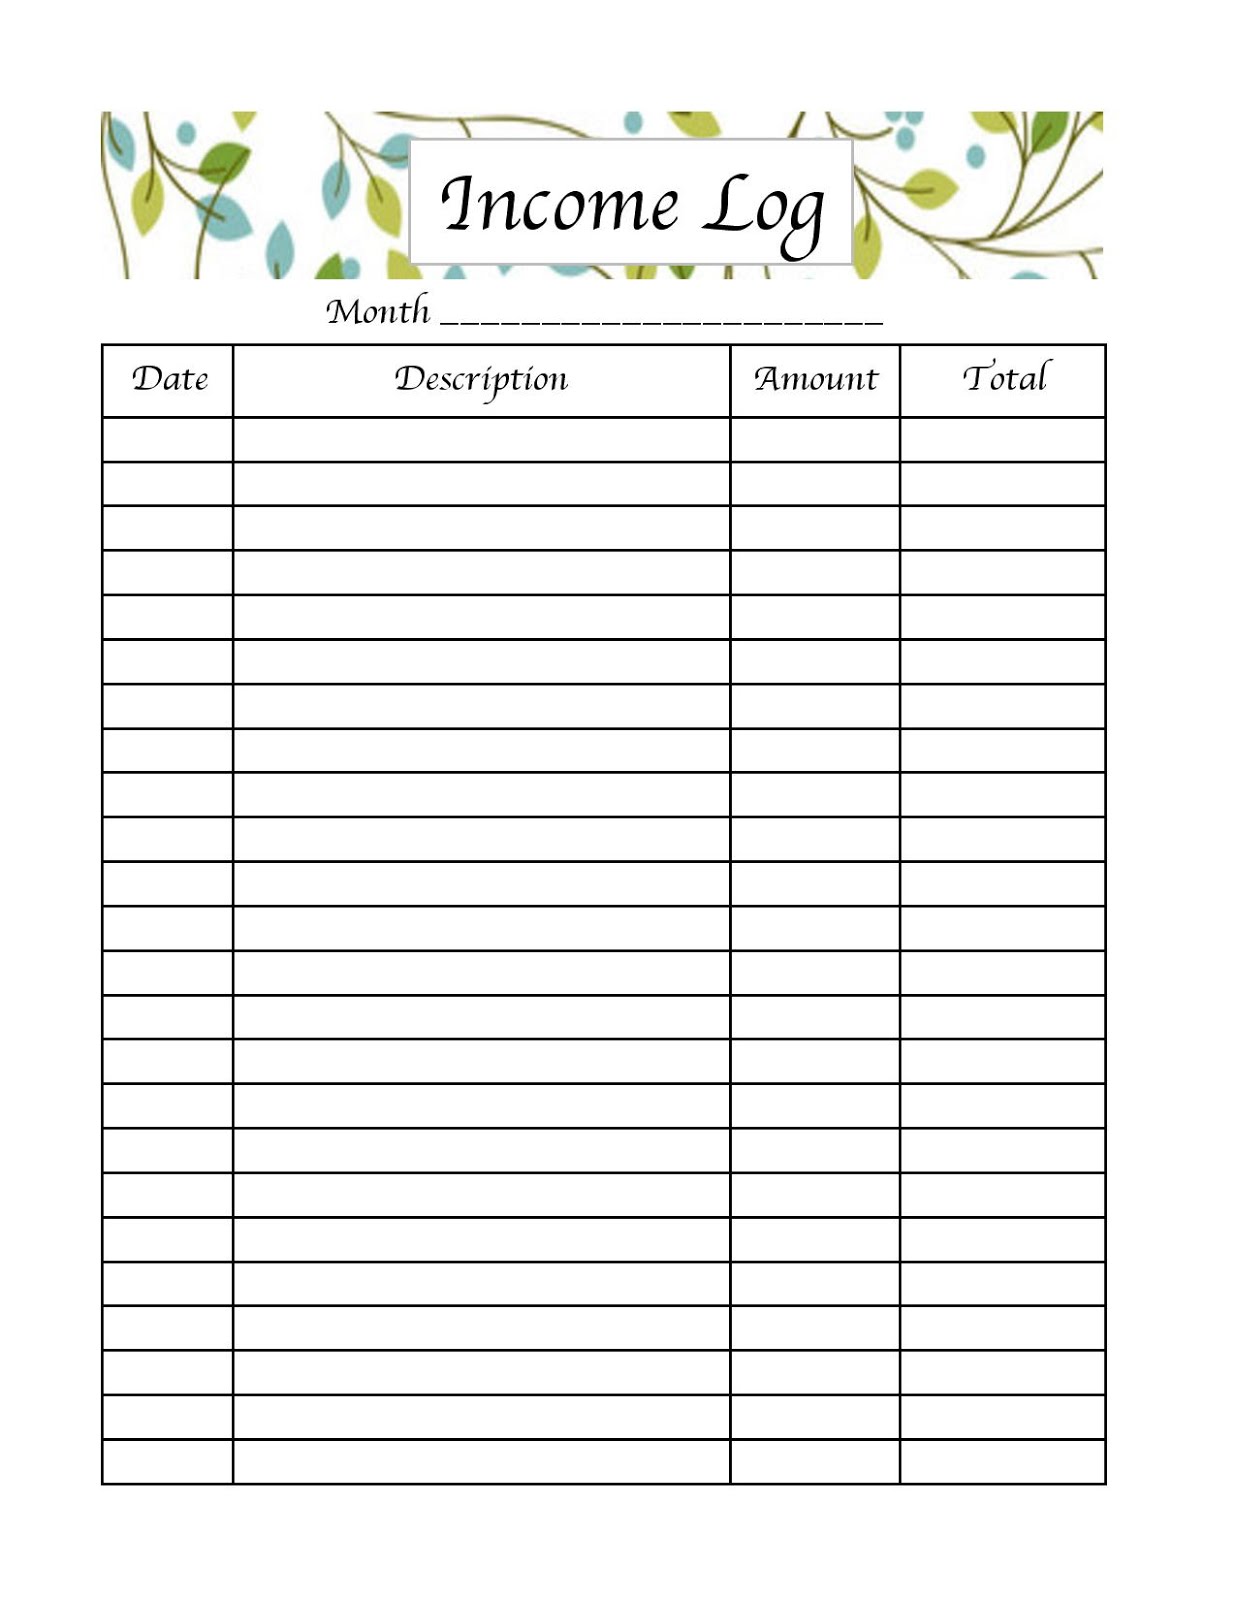 free-printable-income-execution-form-printable-forms-free-online